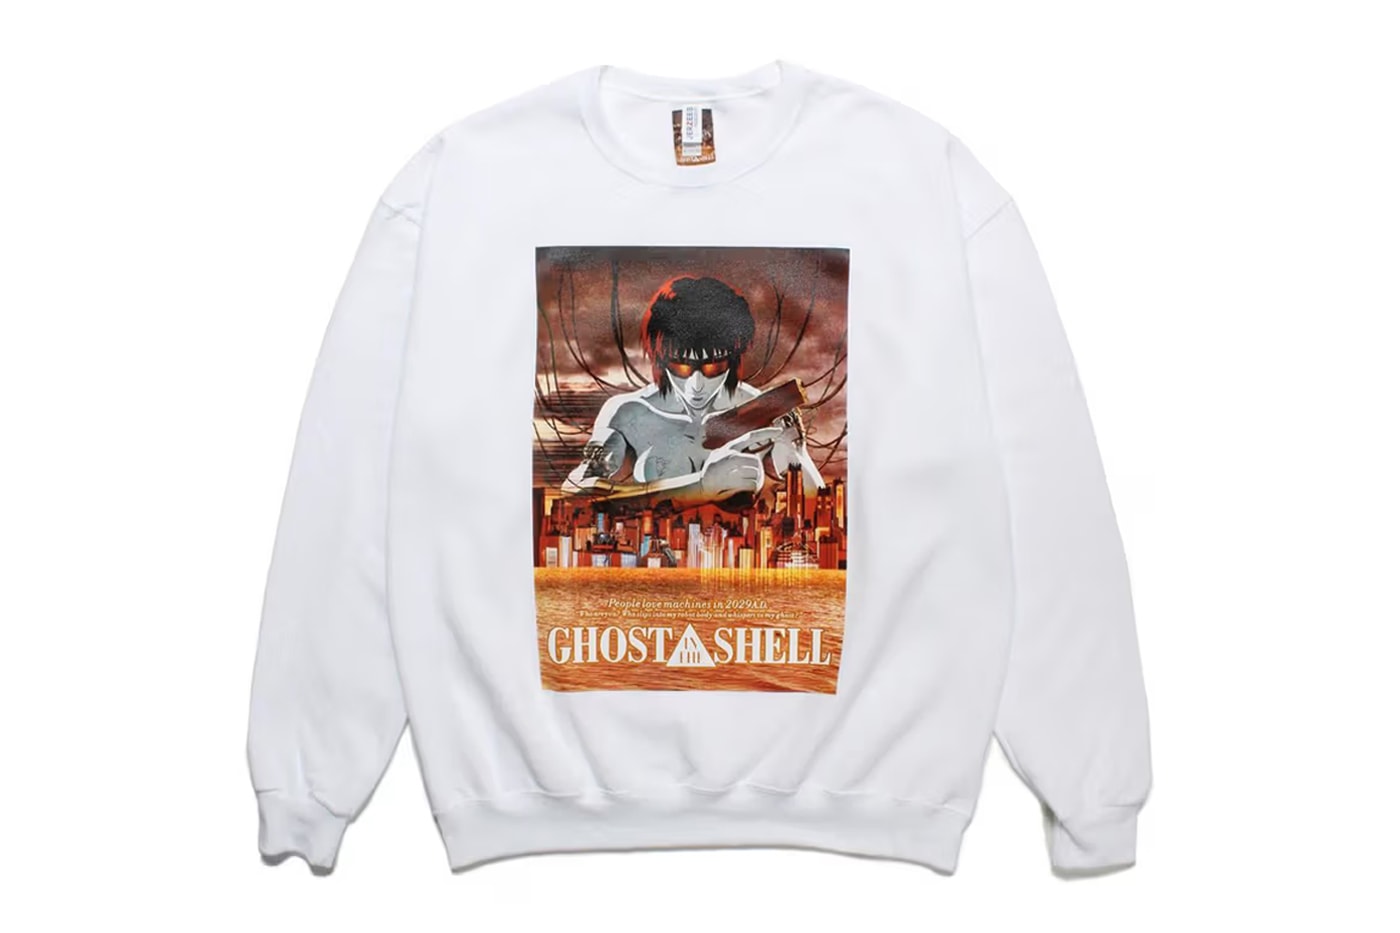 Ghost in the Shell WACKO MARIA Capsule Release Date info store list buying guide photos price